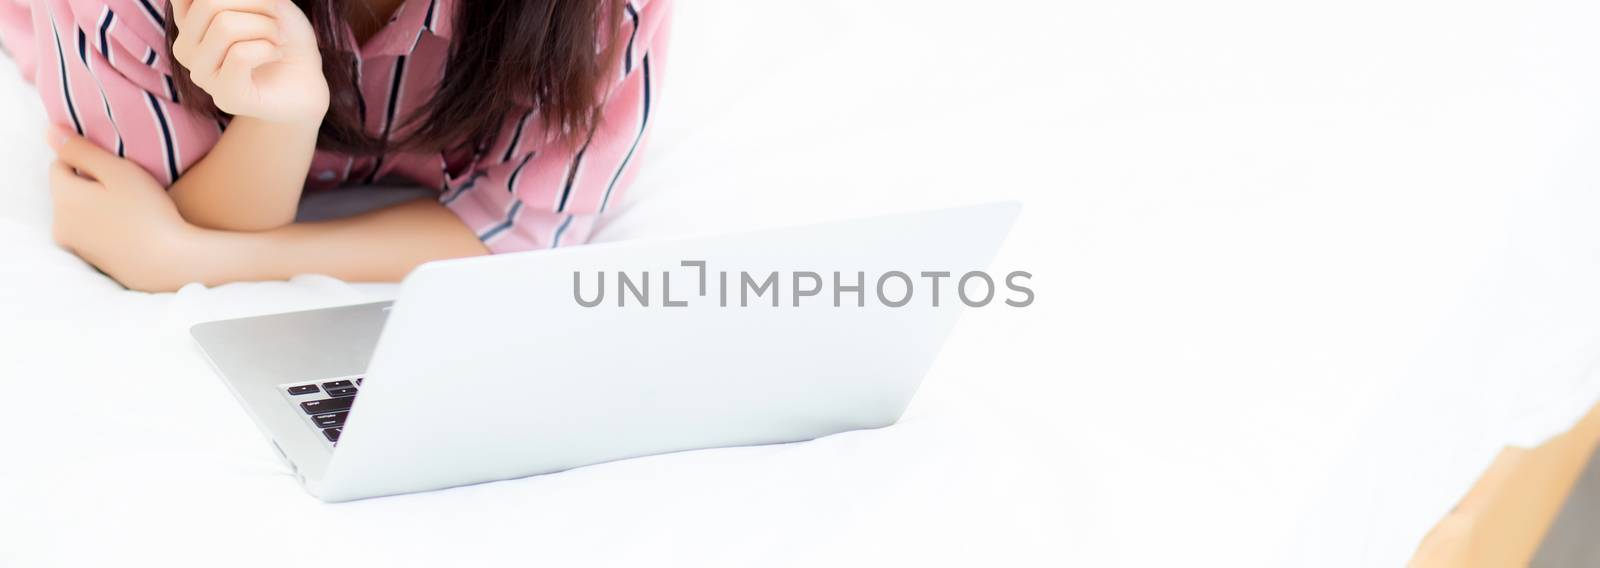 Banner website asian young woman lying on bed using laptop compu by nnudoo